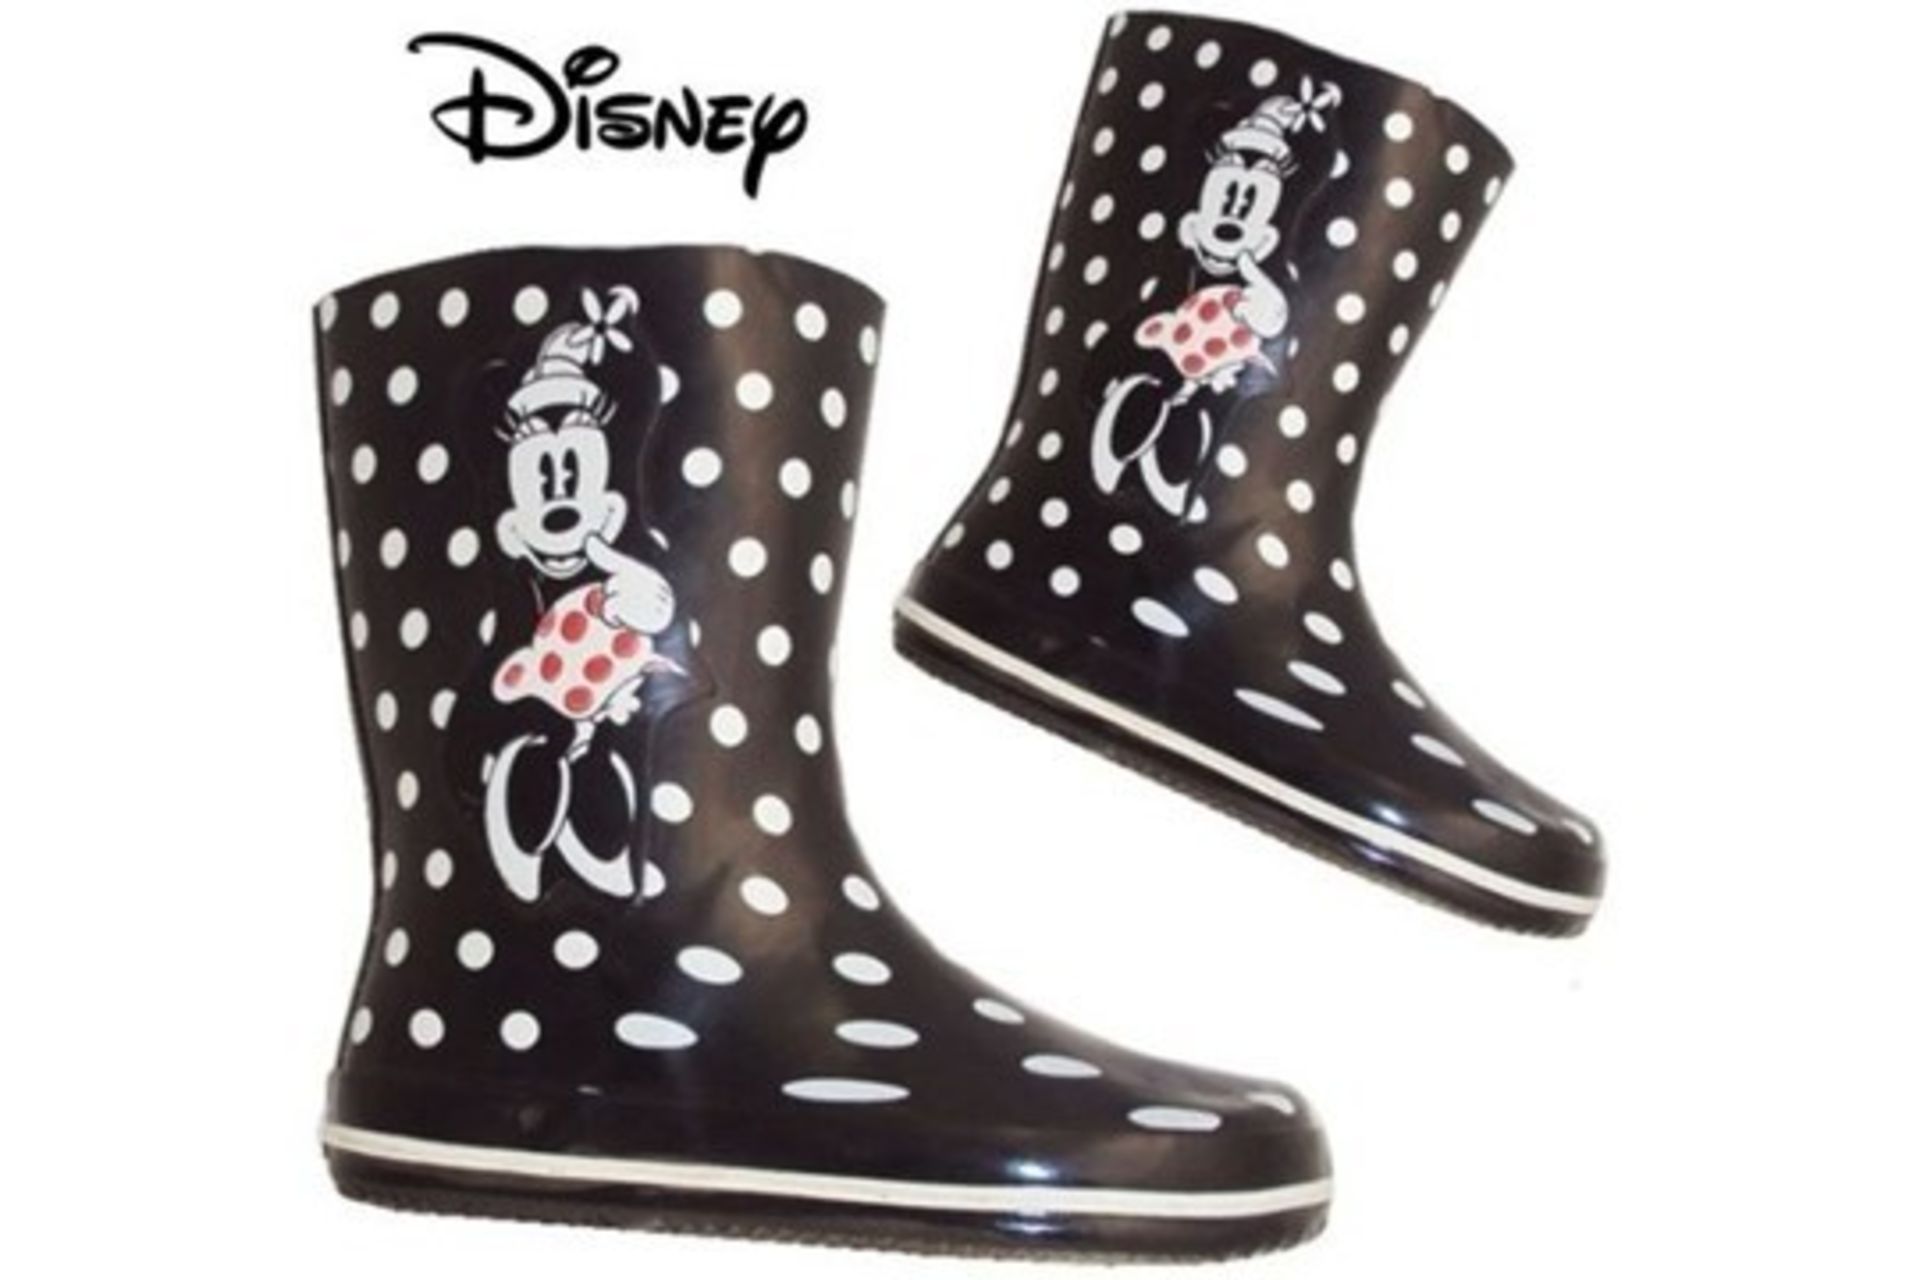 Brand New Pair of Childrens Minnie Mouse Polka Dot Design Wellington Boots in Black and White in